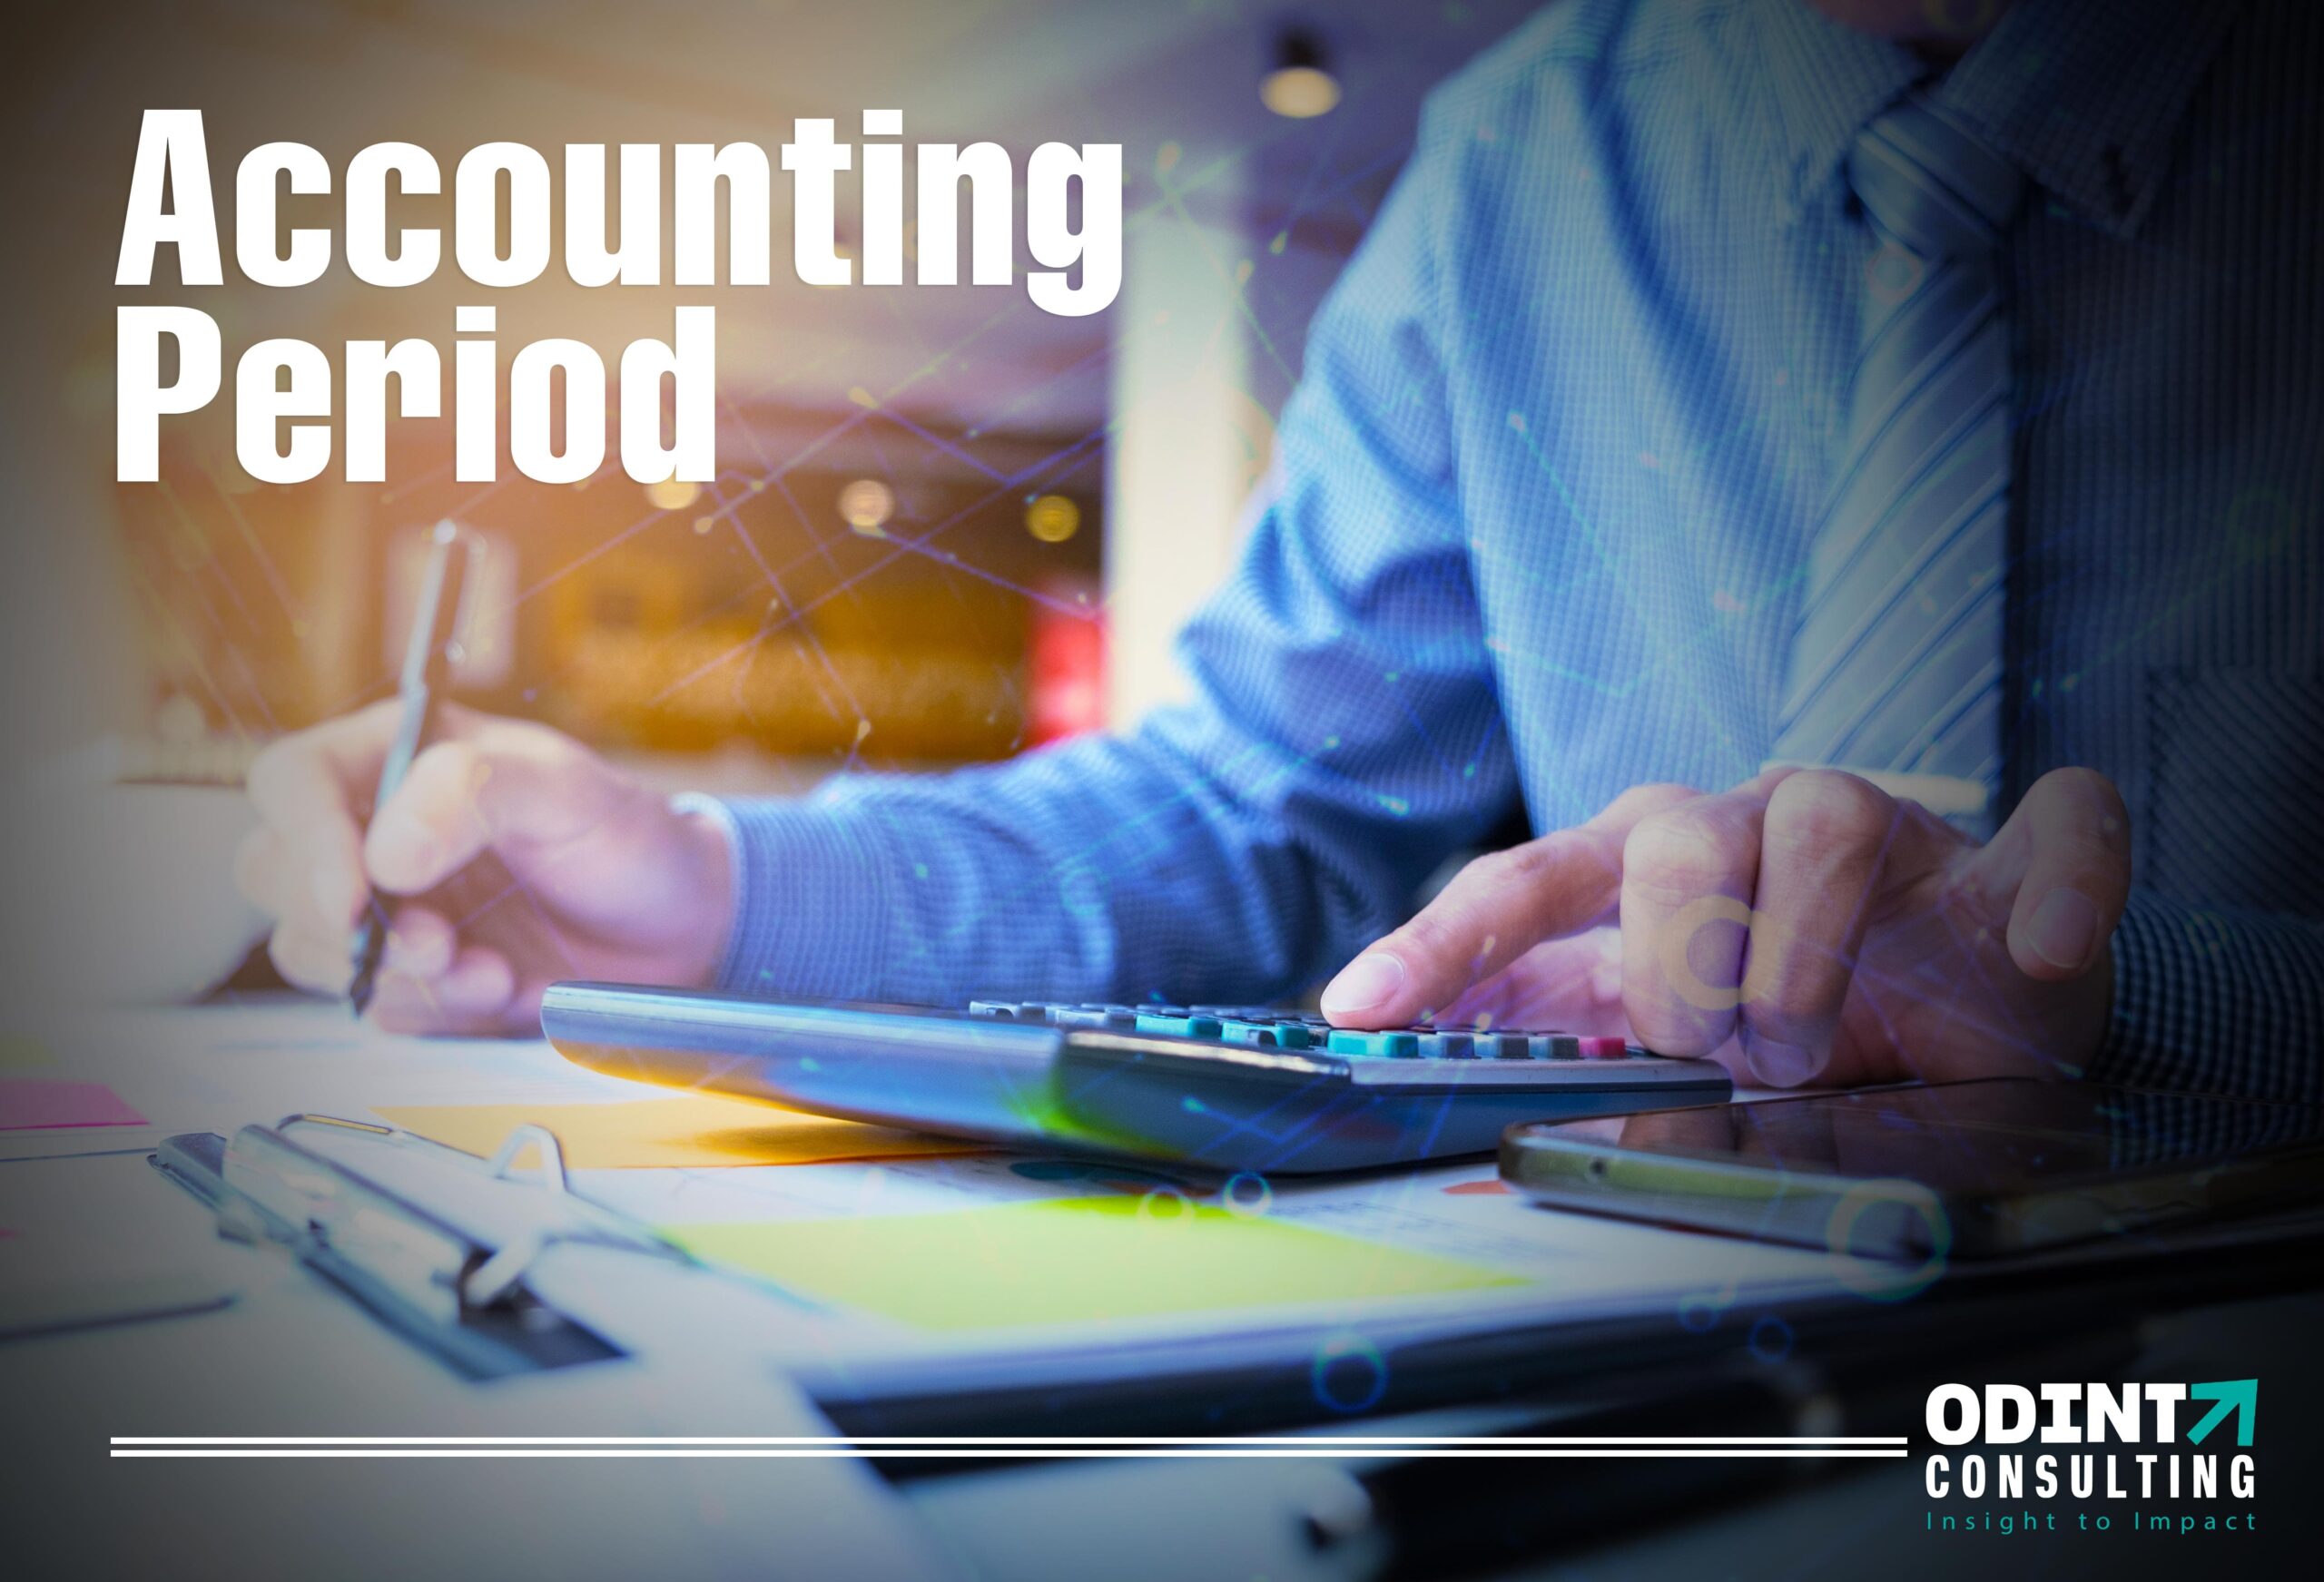 Accounting Period: Types, Requirements & Benefits Explained